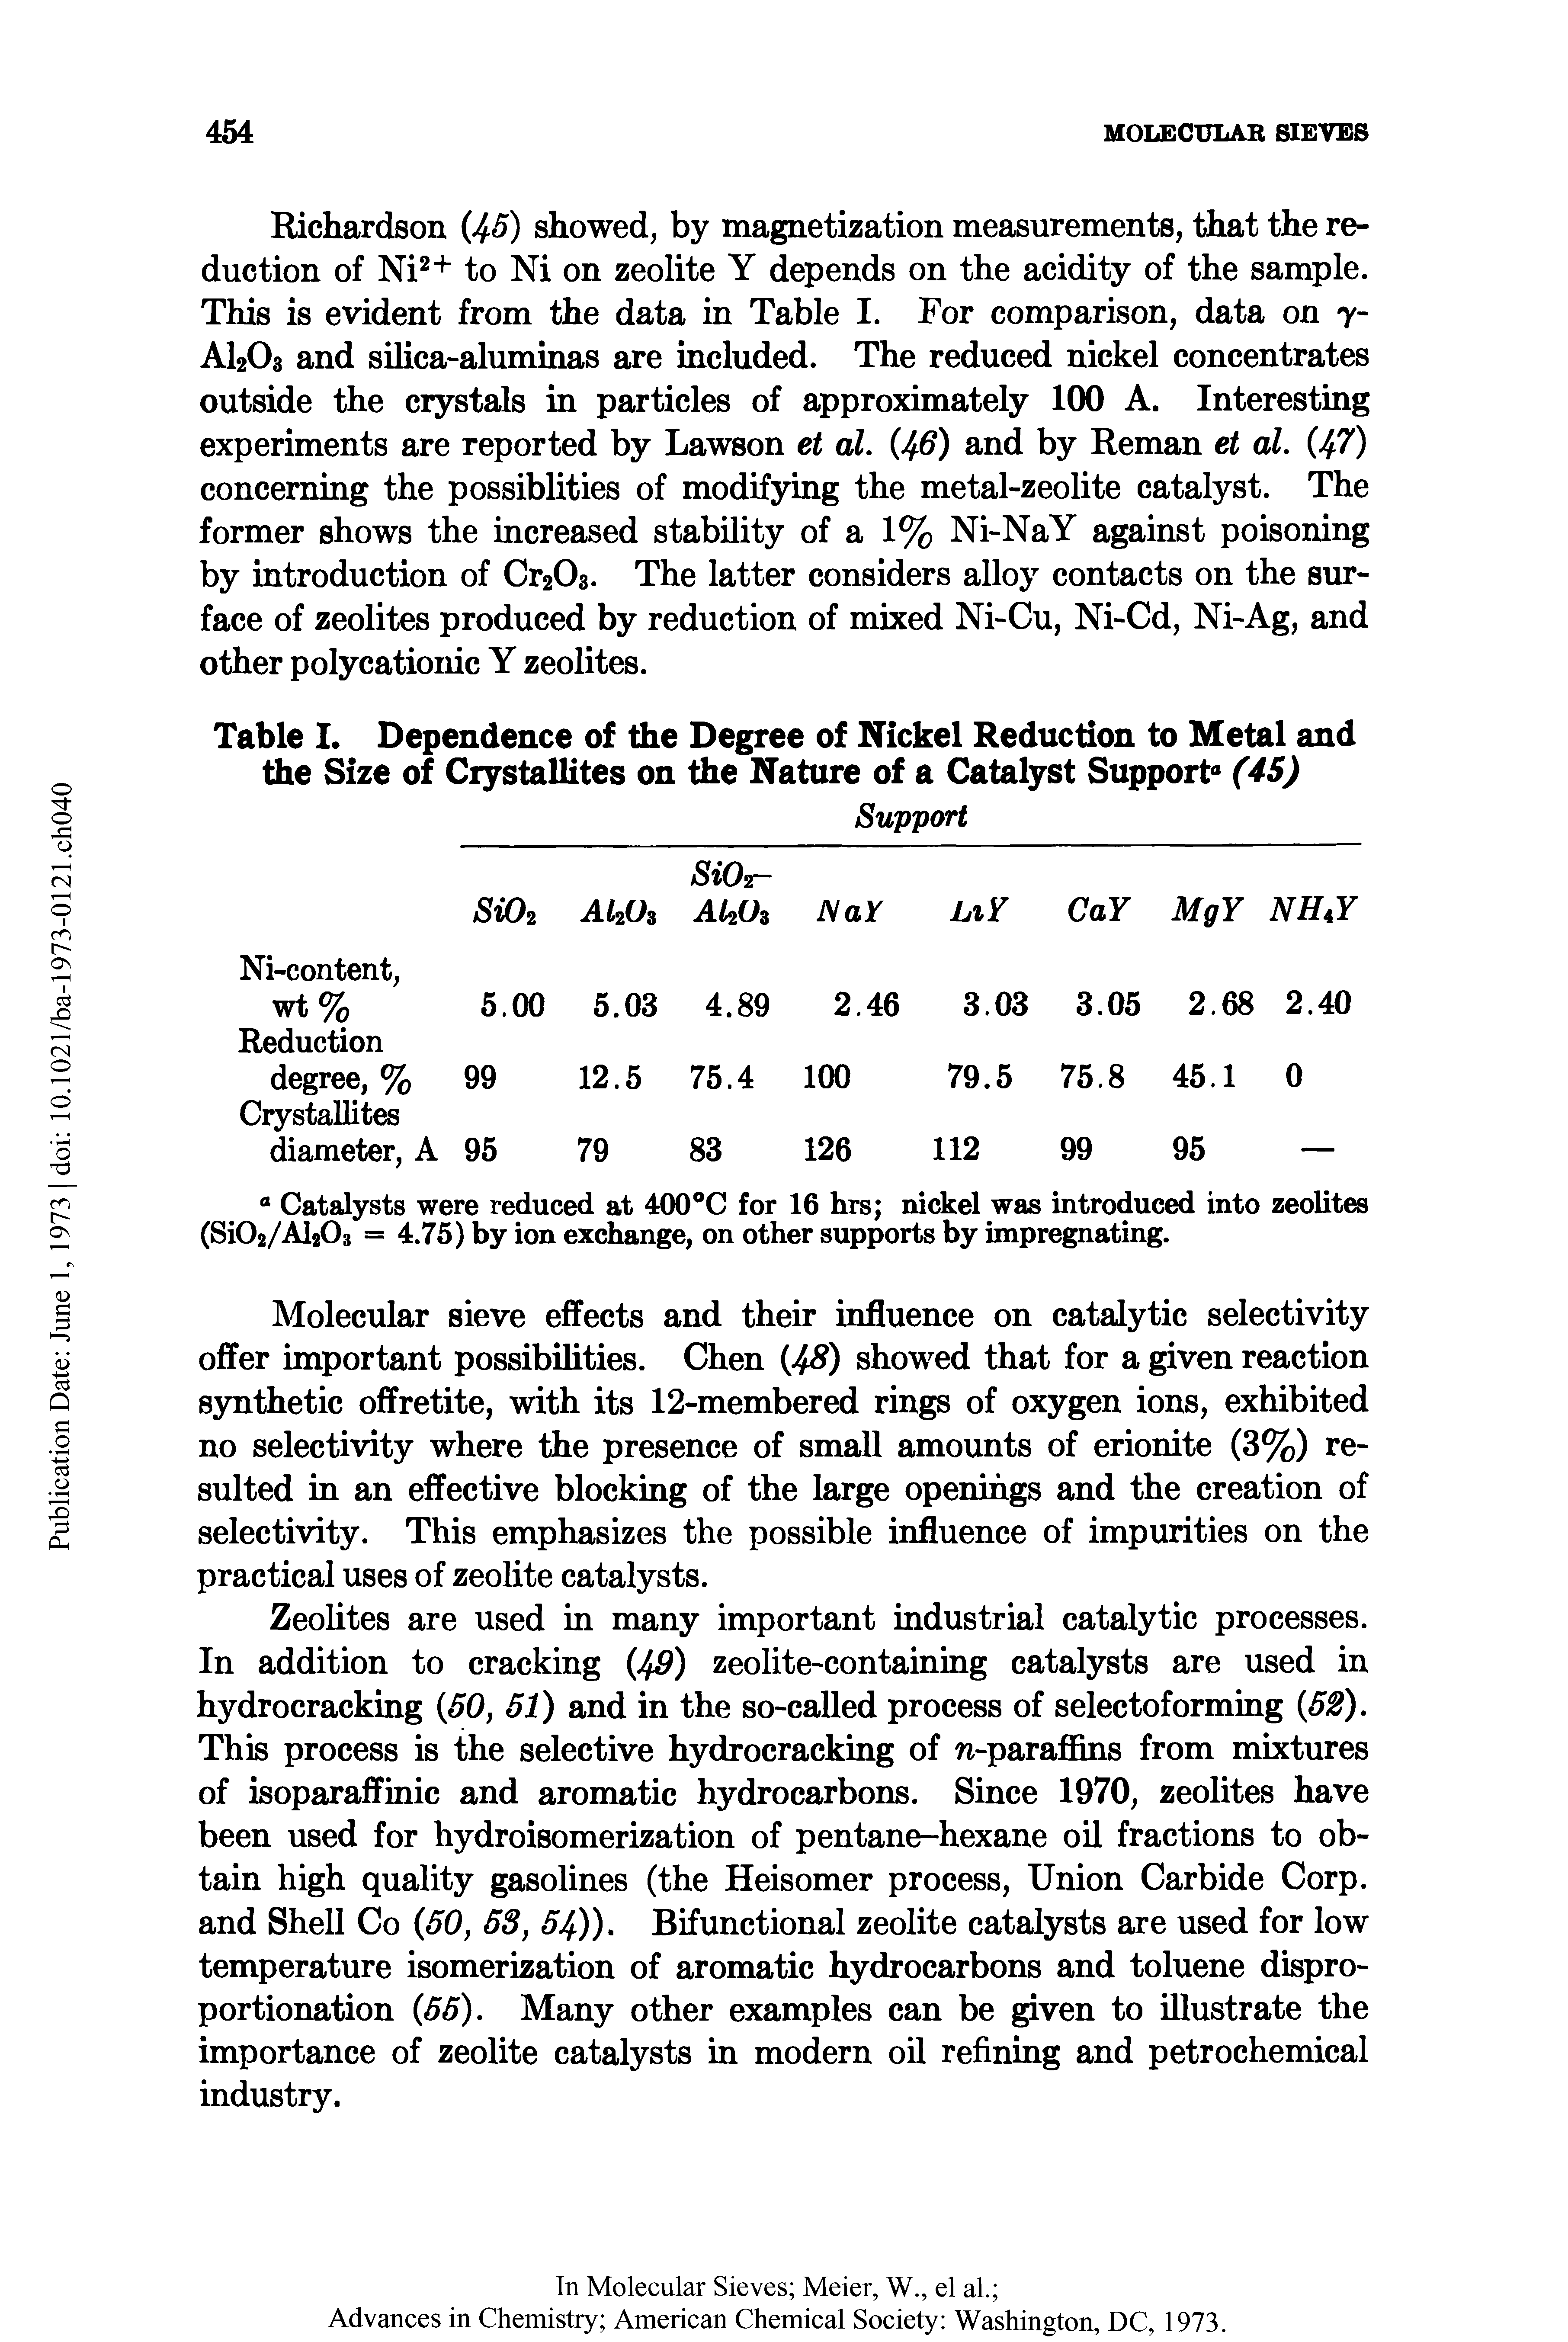 Table I. Dependence of the Degree of Nickel Reduction to Metal and the Size of Crystallites on the Nature of a Catalyst Support (45)...